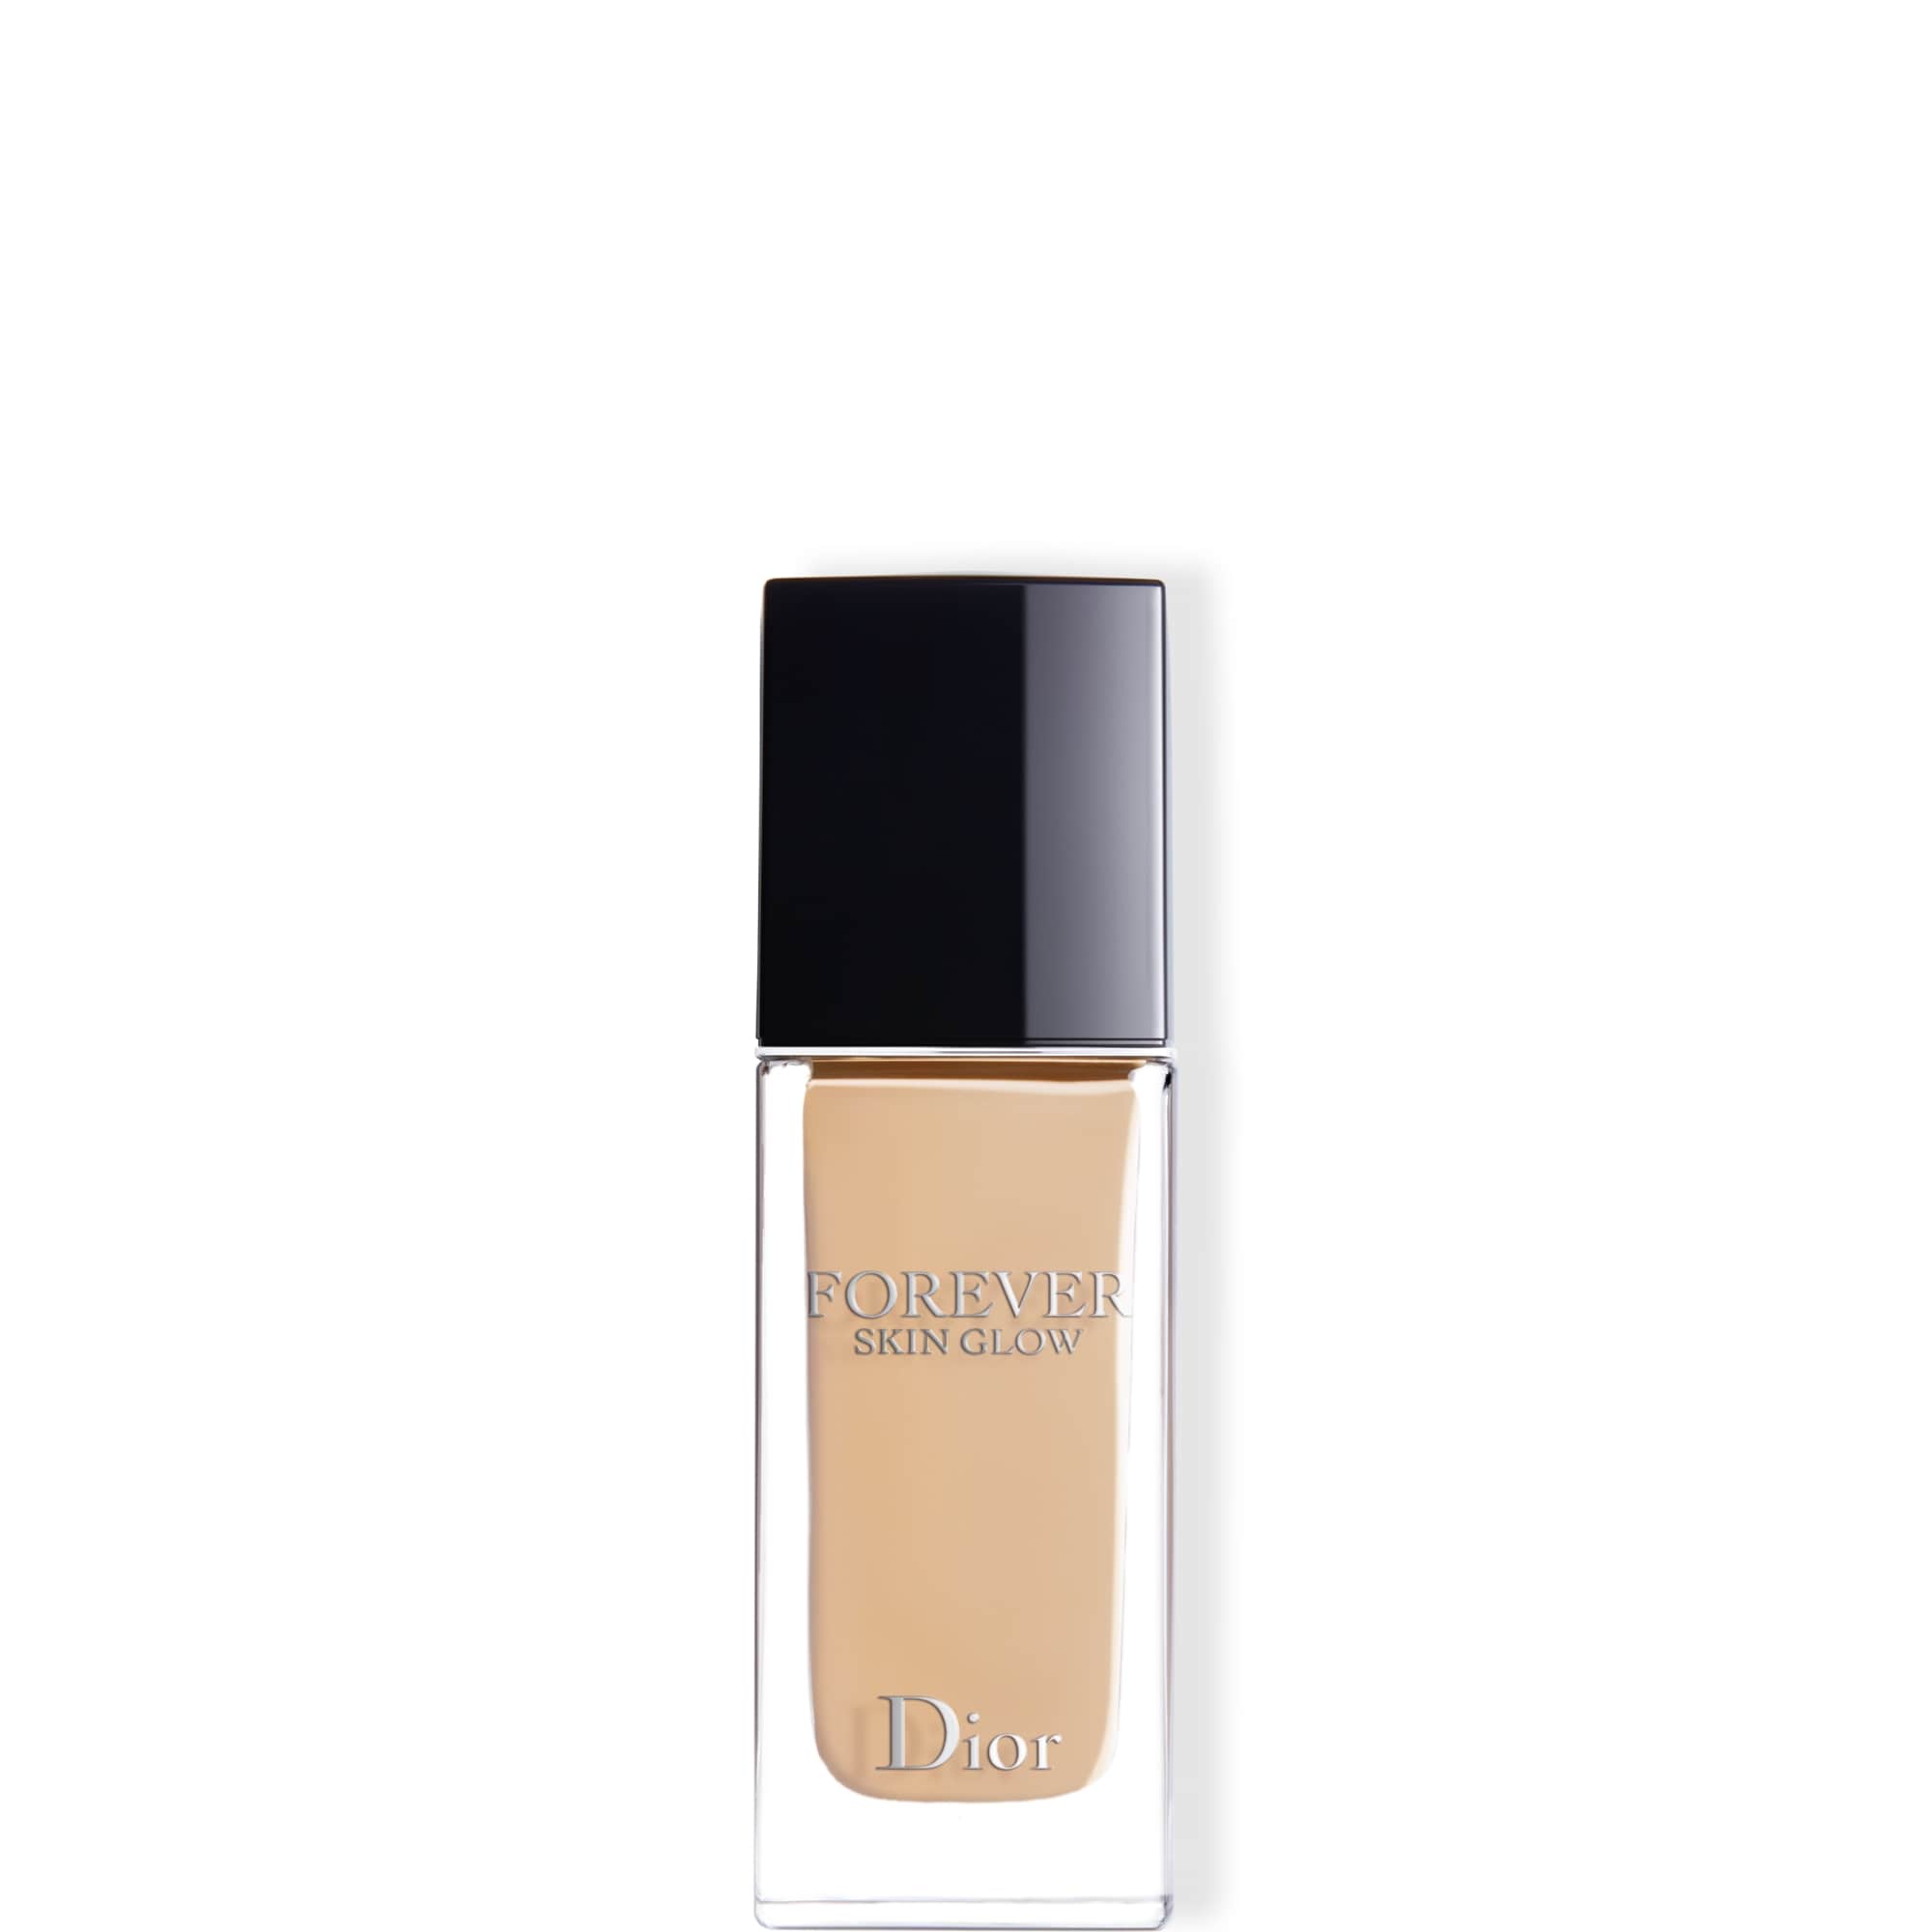 Forever Foundation trial size in shade 2N  Dior  Sephora